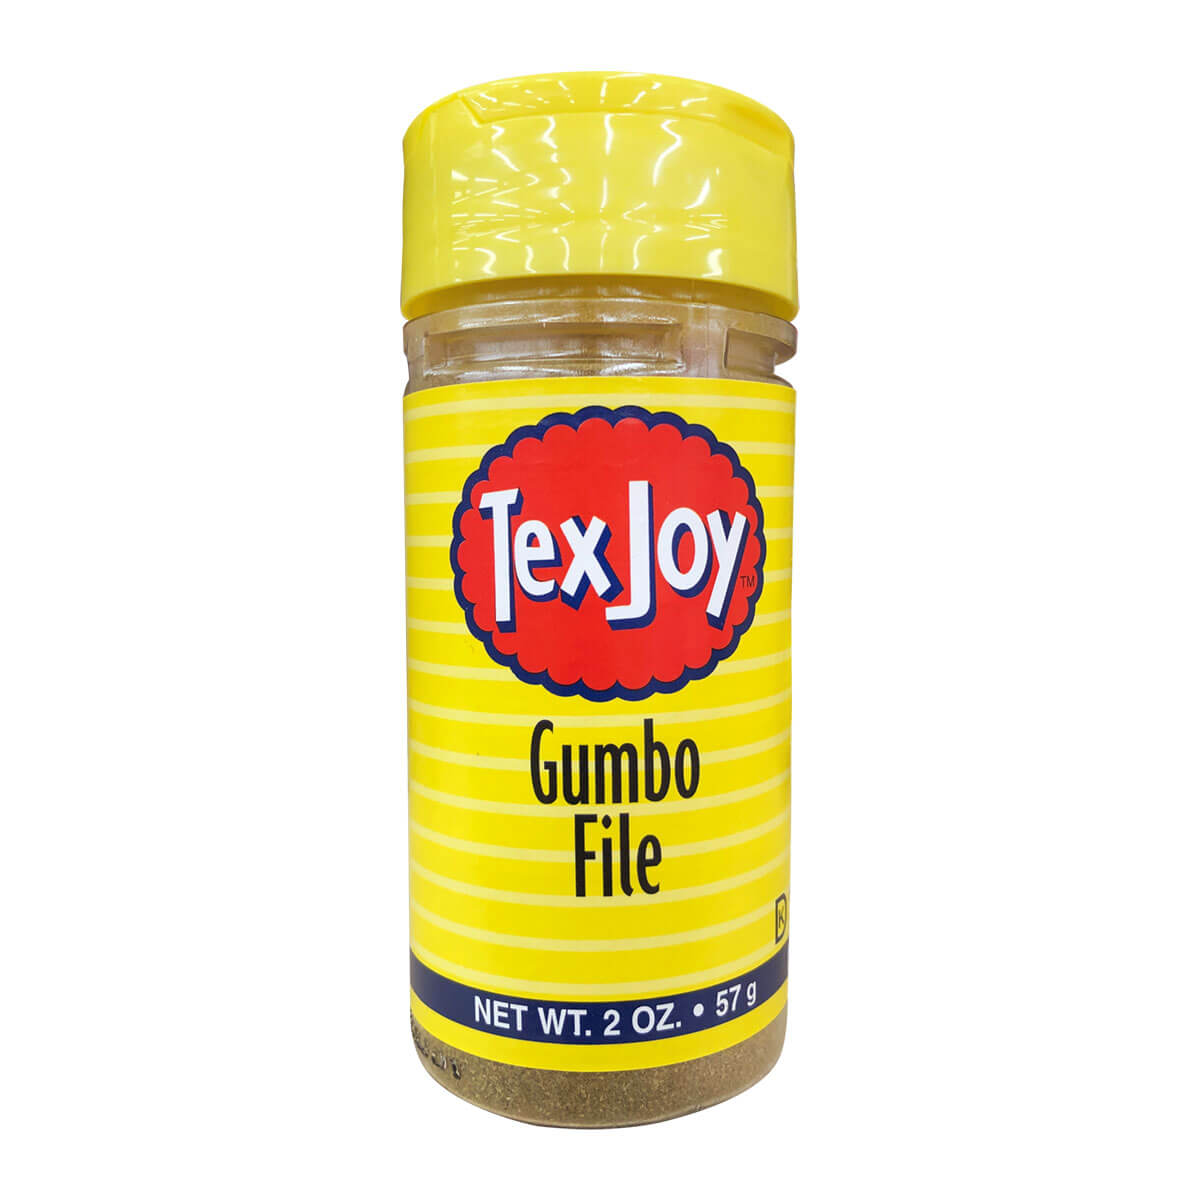 http://www.texjoy.com/Shared/Images/Product/Gumbo-File-2-oz/texjoy-gumbo-file-2oz.jpg